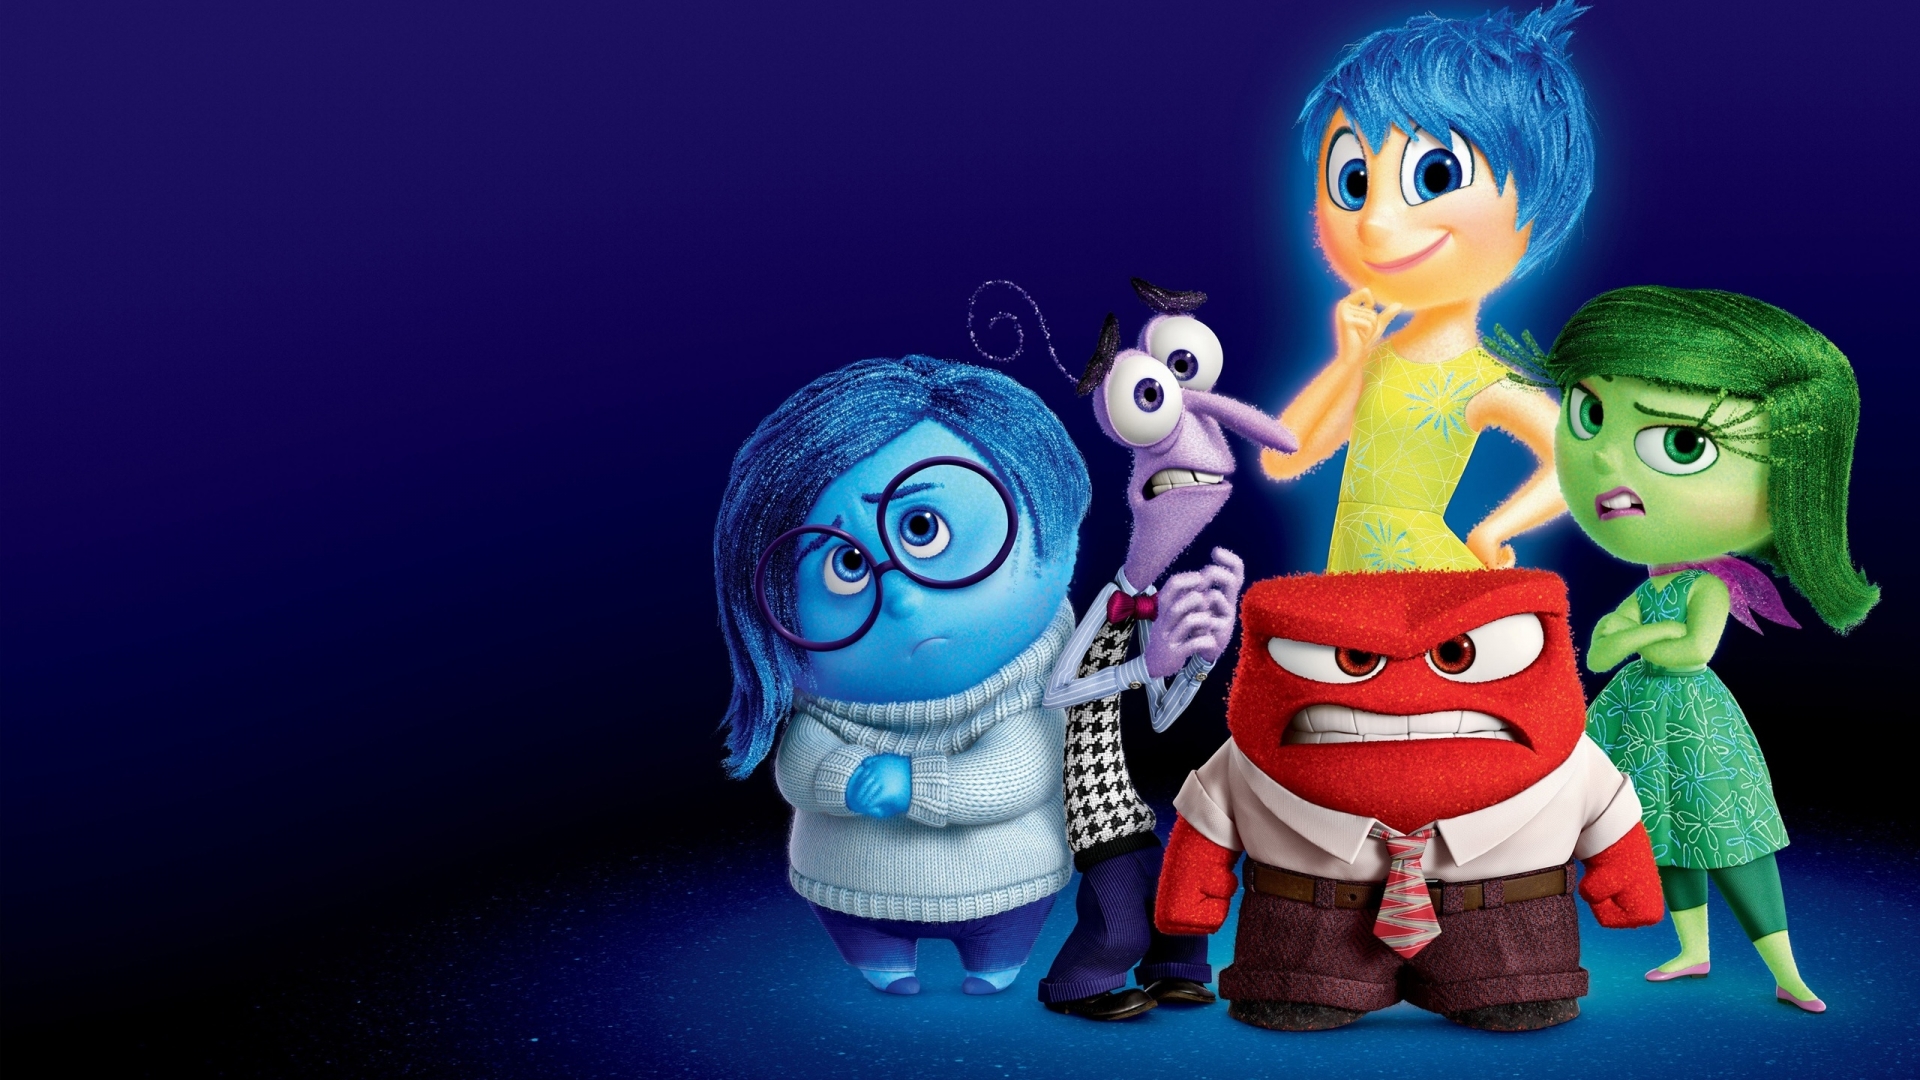 Inside Out Movie for 1920 x 1080 HDTV 1080p resolution